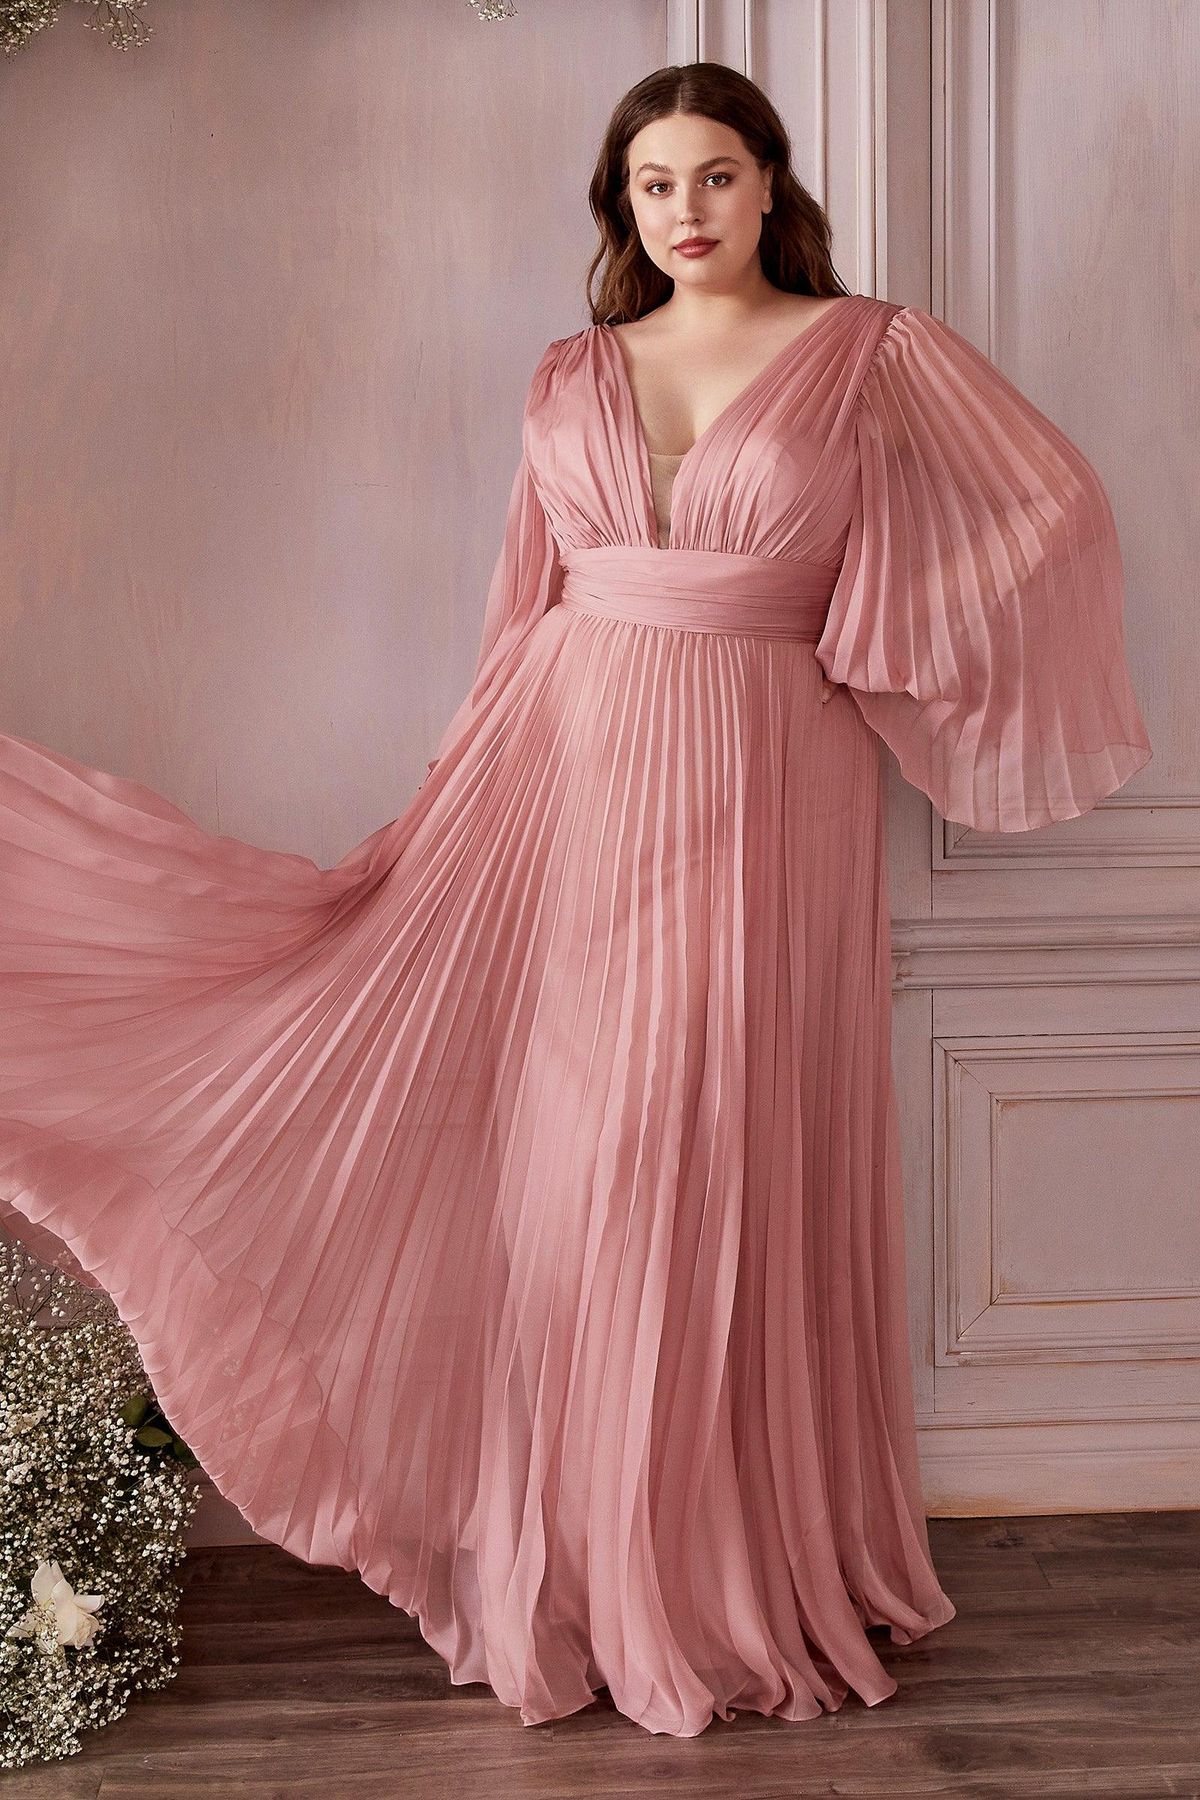 Cinderella Divine CD0192 LONG SLEEVE CHIFFON DRESS - Special Occasion/